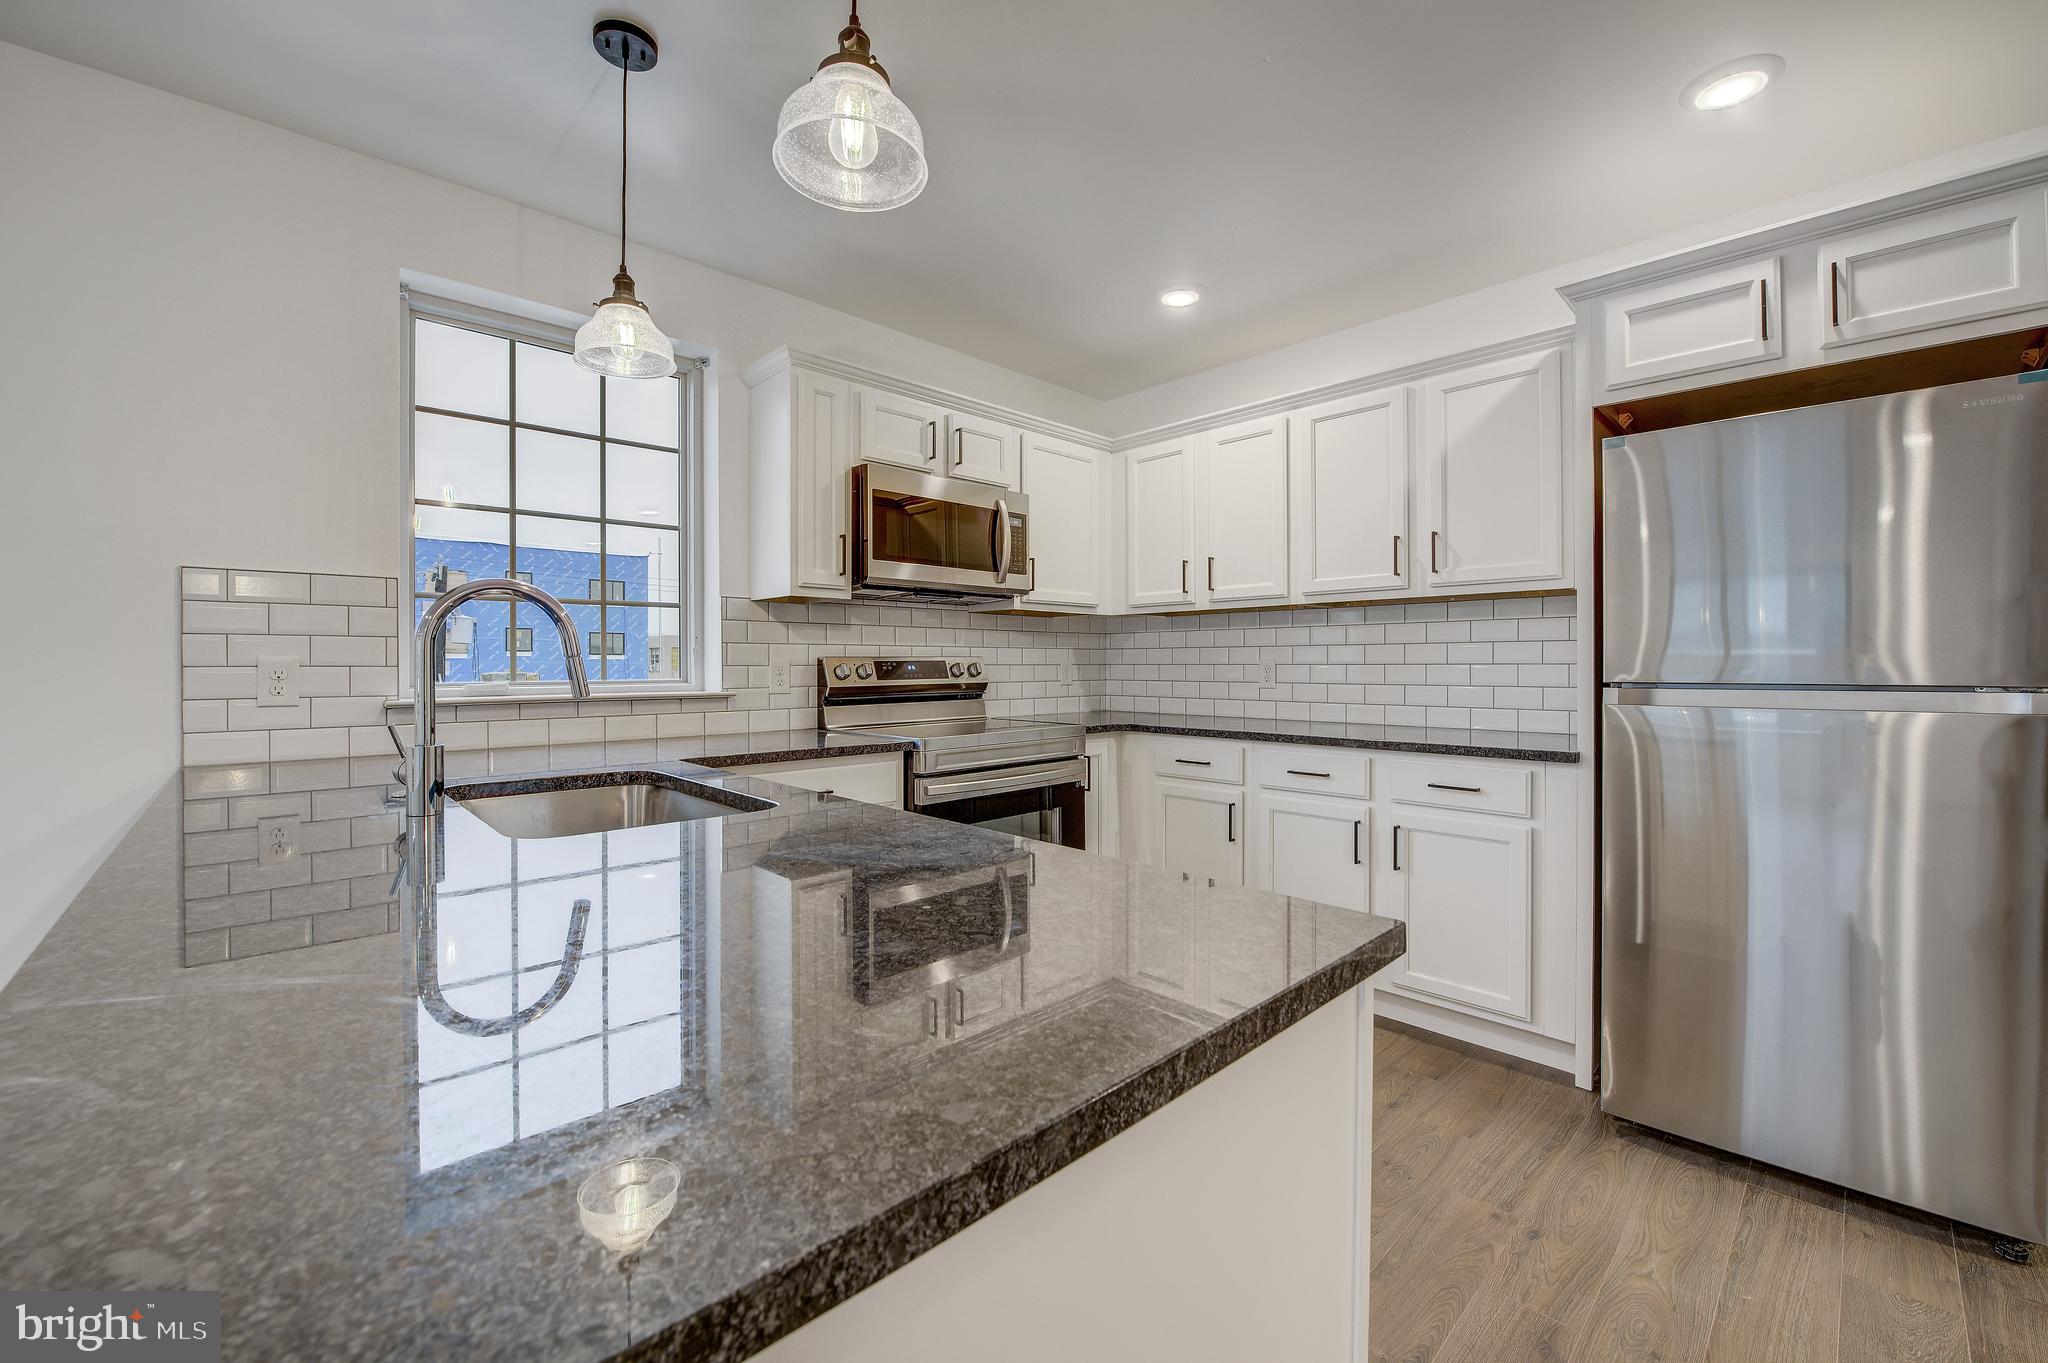 a kitchen with kitchen island granite countertop stainless steel appliances a stove microwave and refrigerator